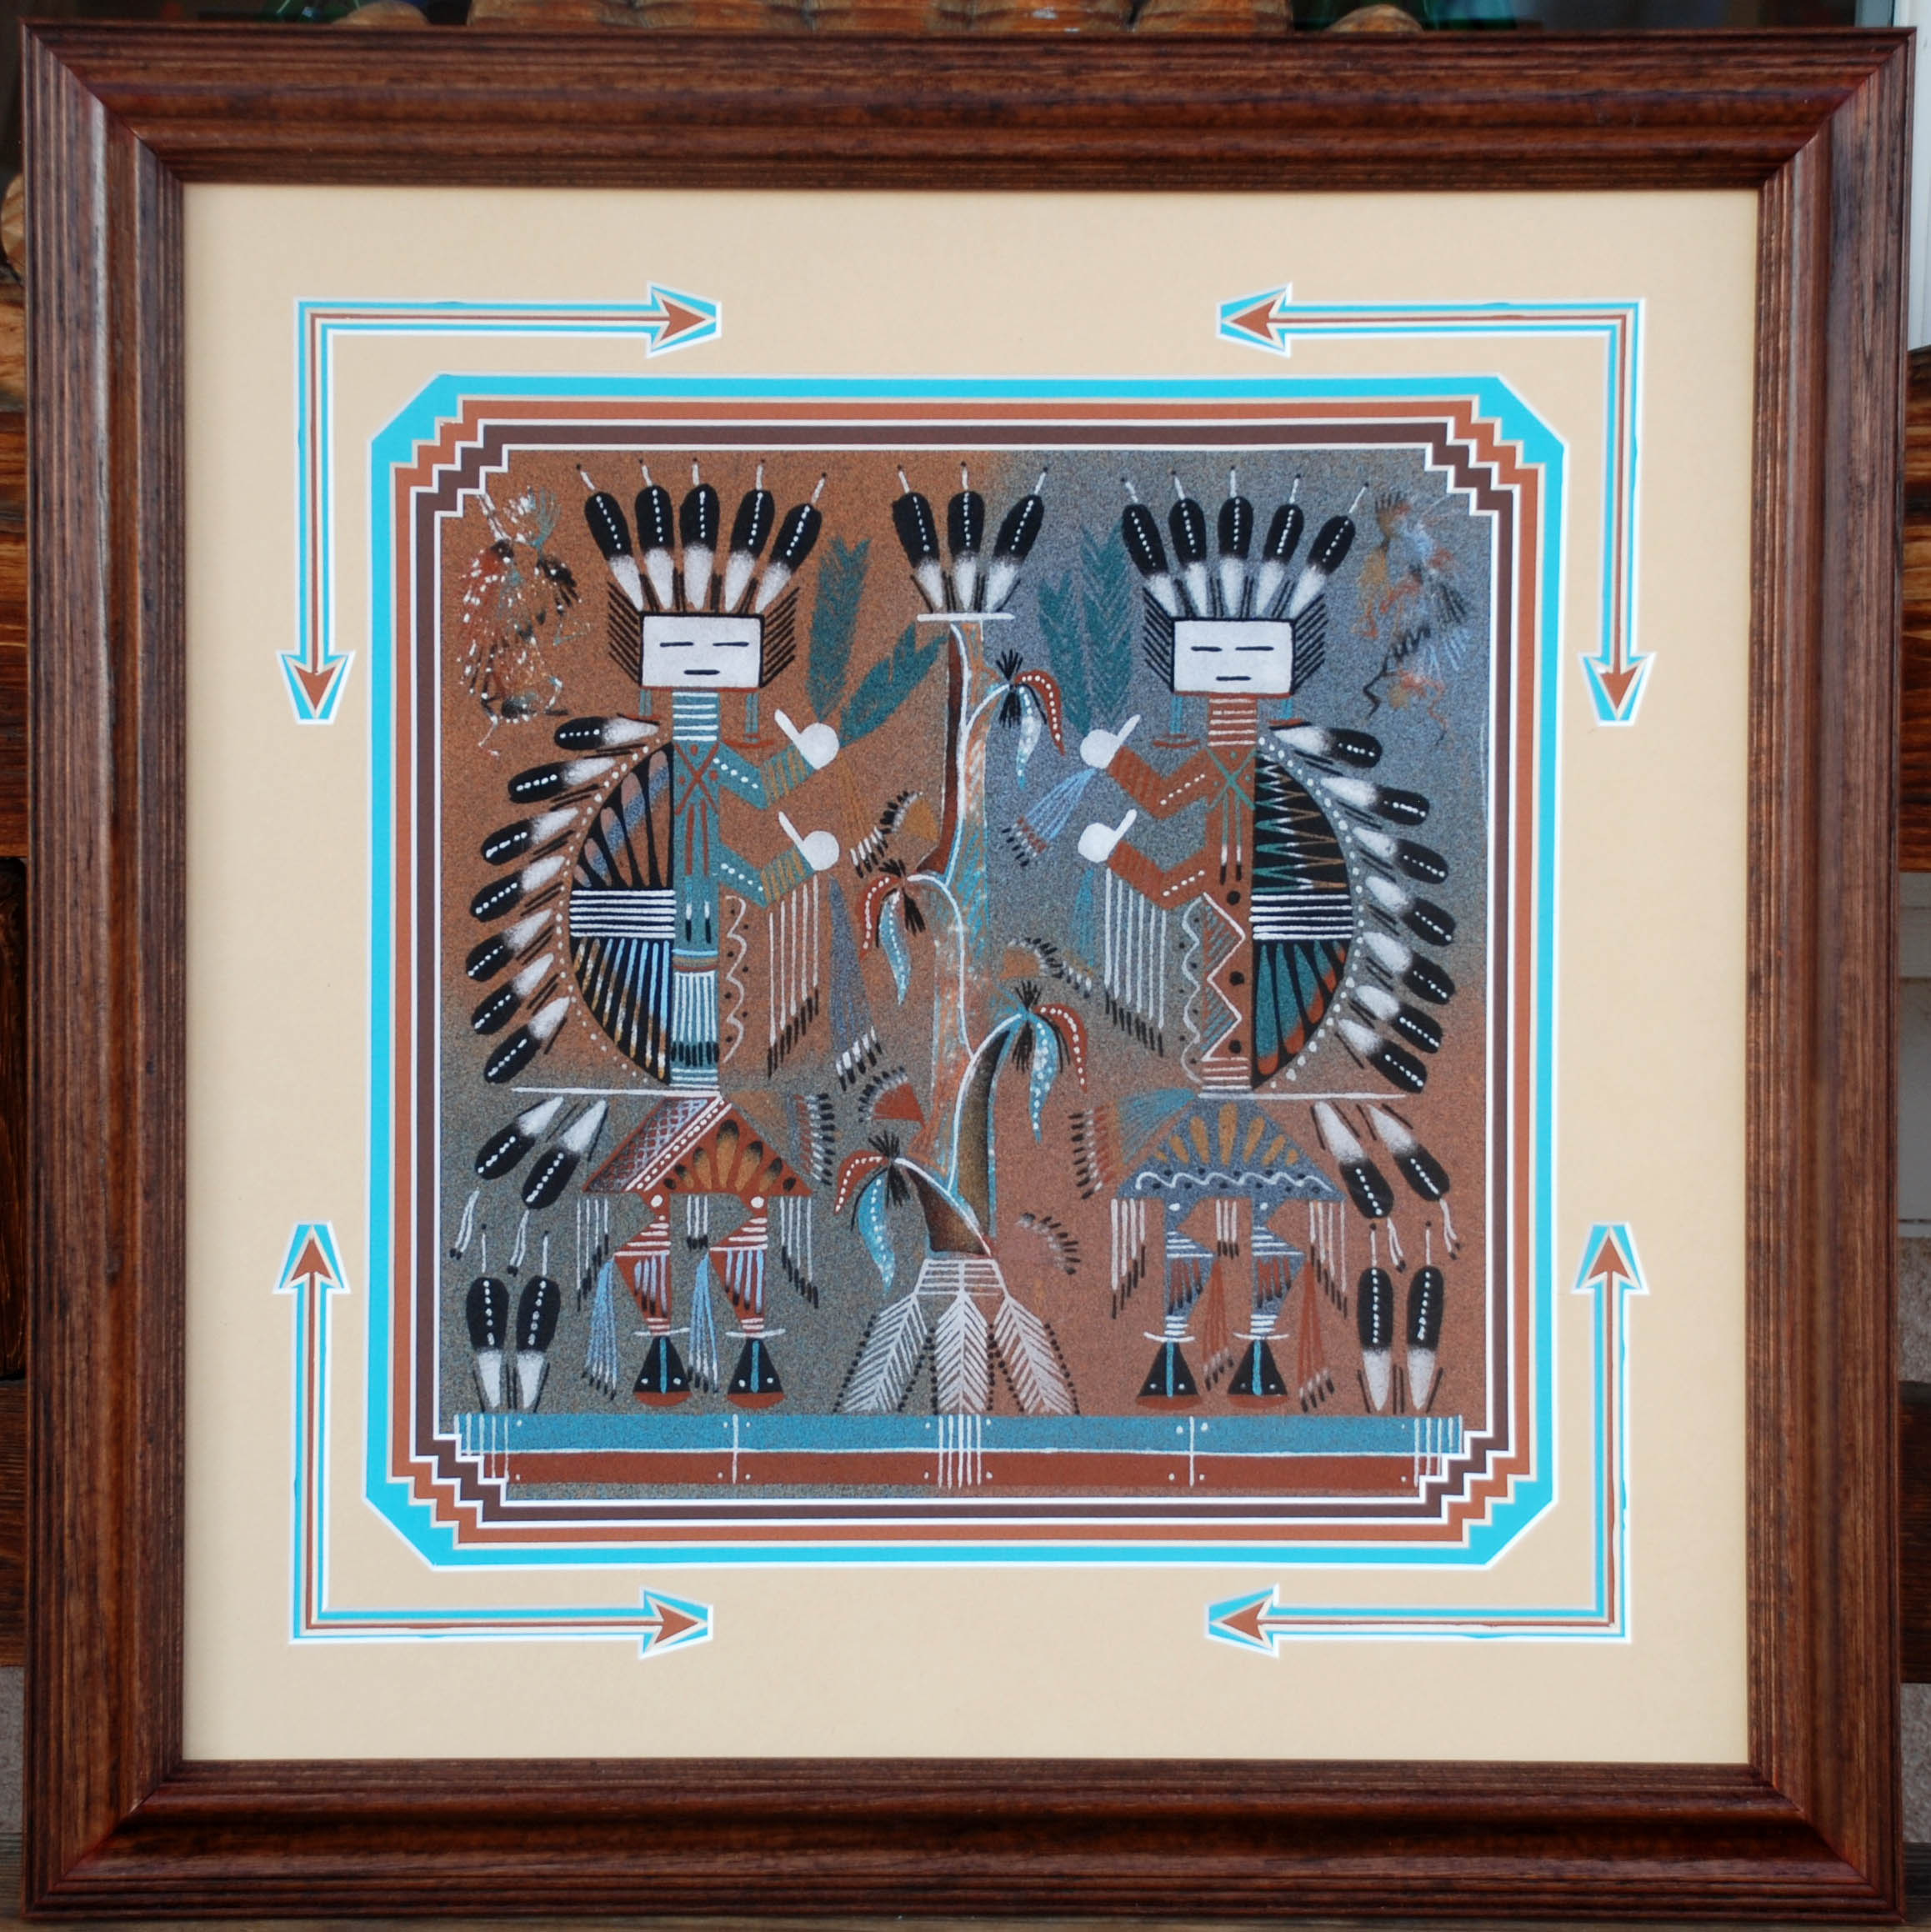 Orlando Myerson | Navajo Sandpainting | Penfield Gallery of Indian Arts | Albuquerque | New Mexico